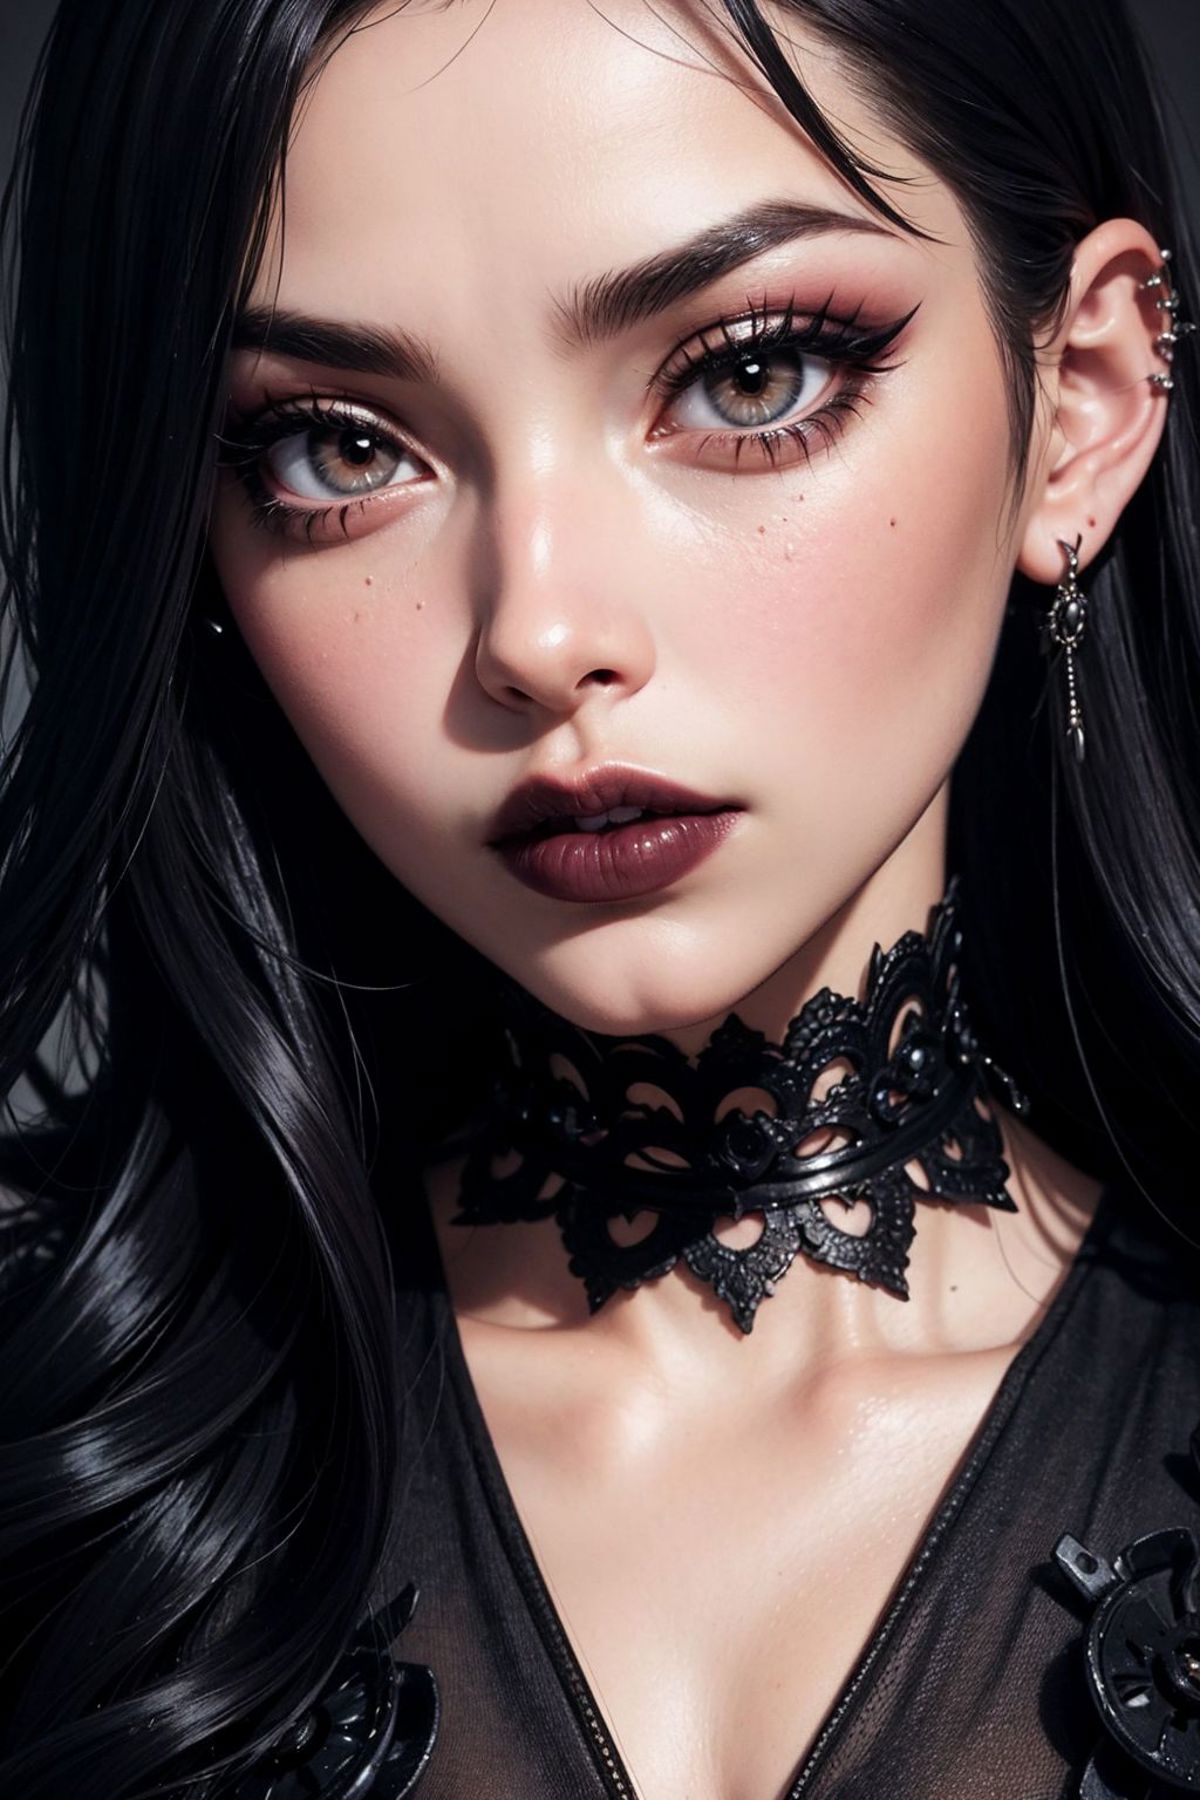 A young woman with long black hair wearing a black lace choker necklace.